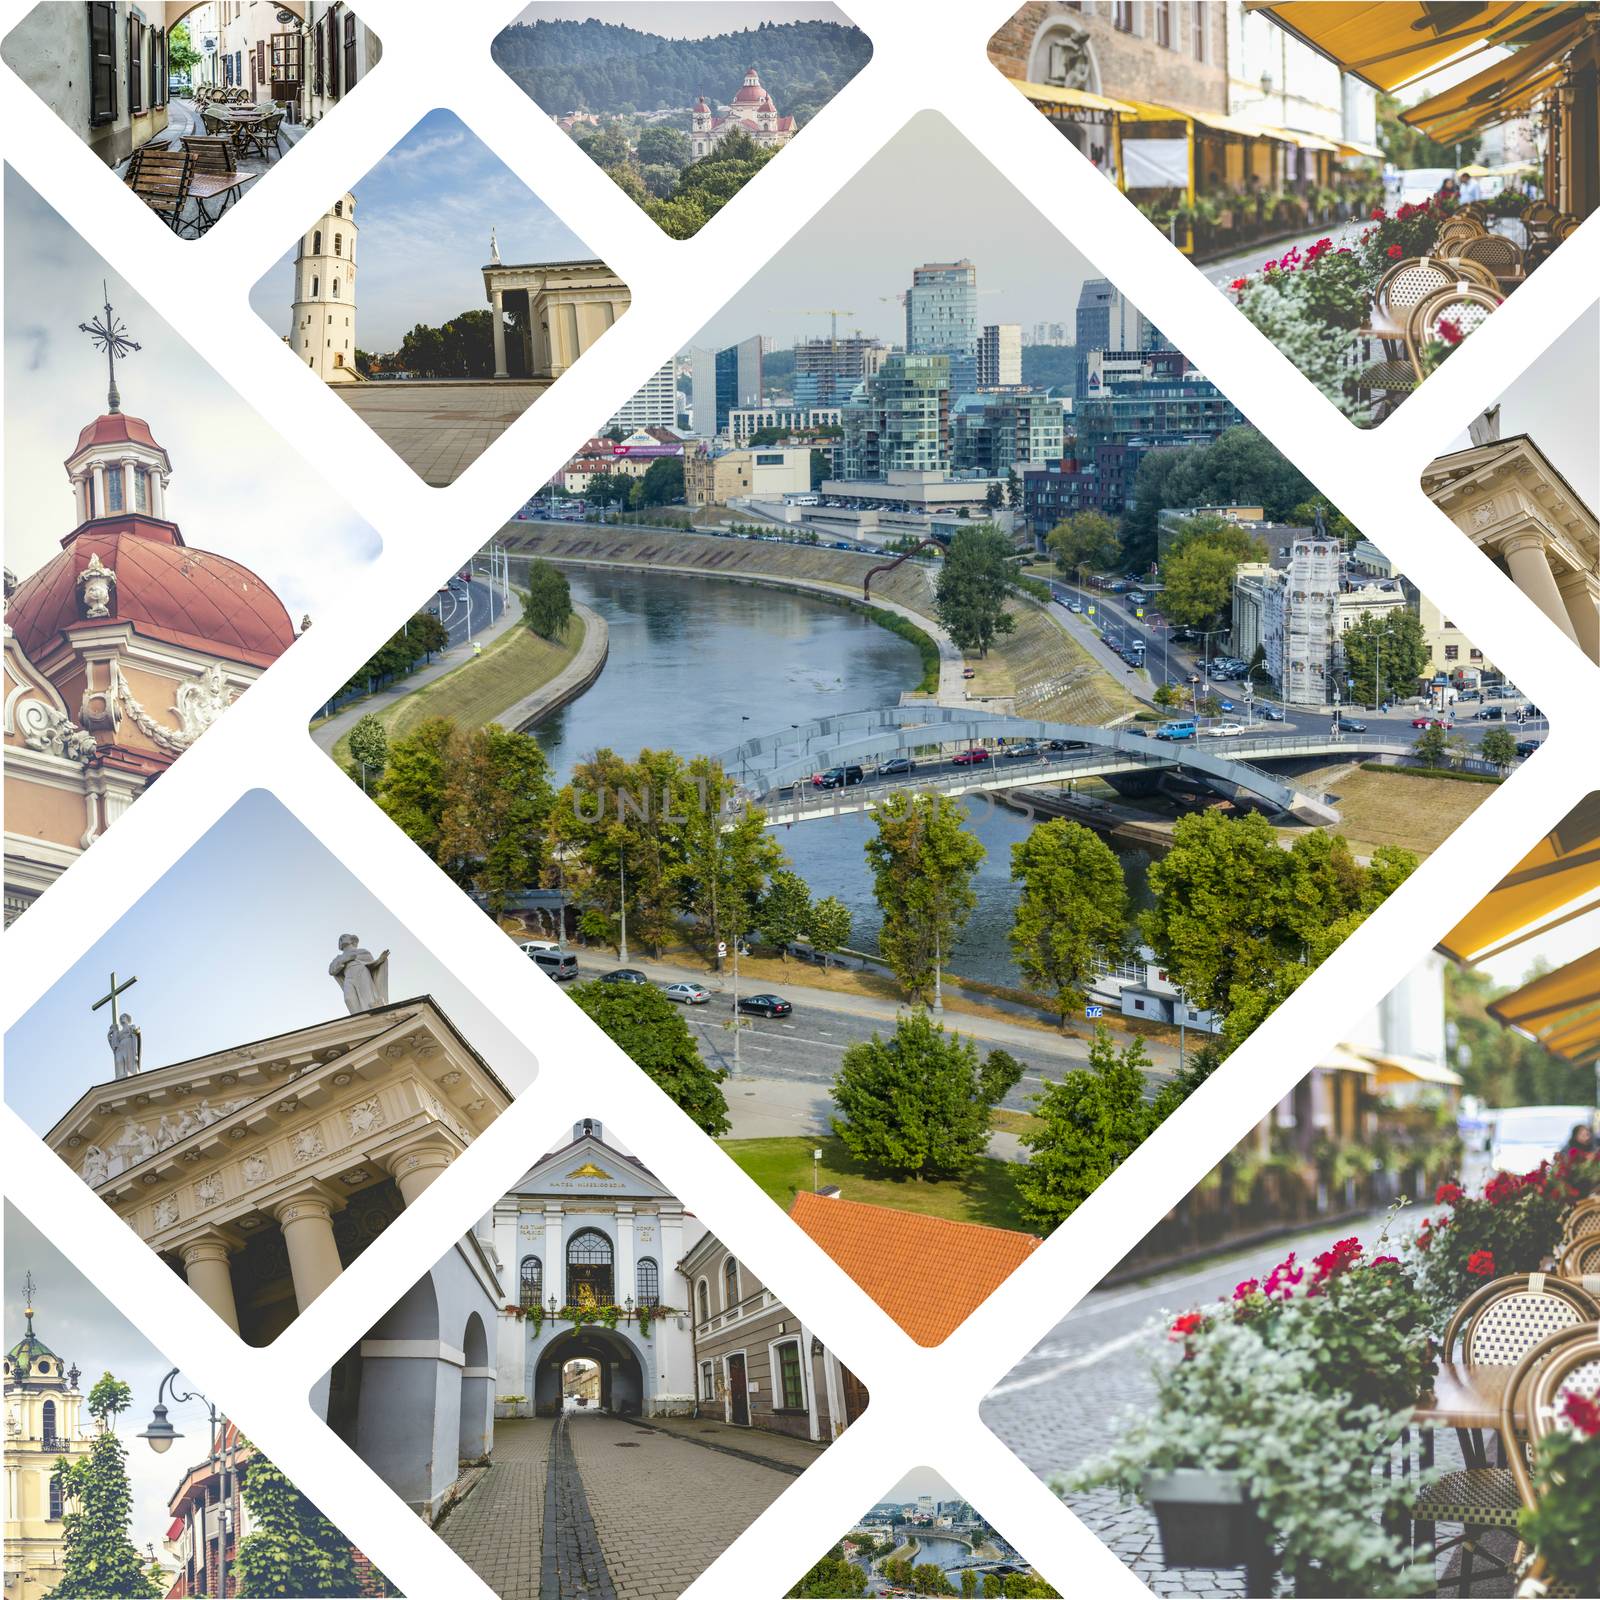 Collage of Vilnius (Lithuania) images - travel background (my photos)